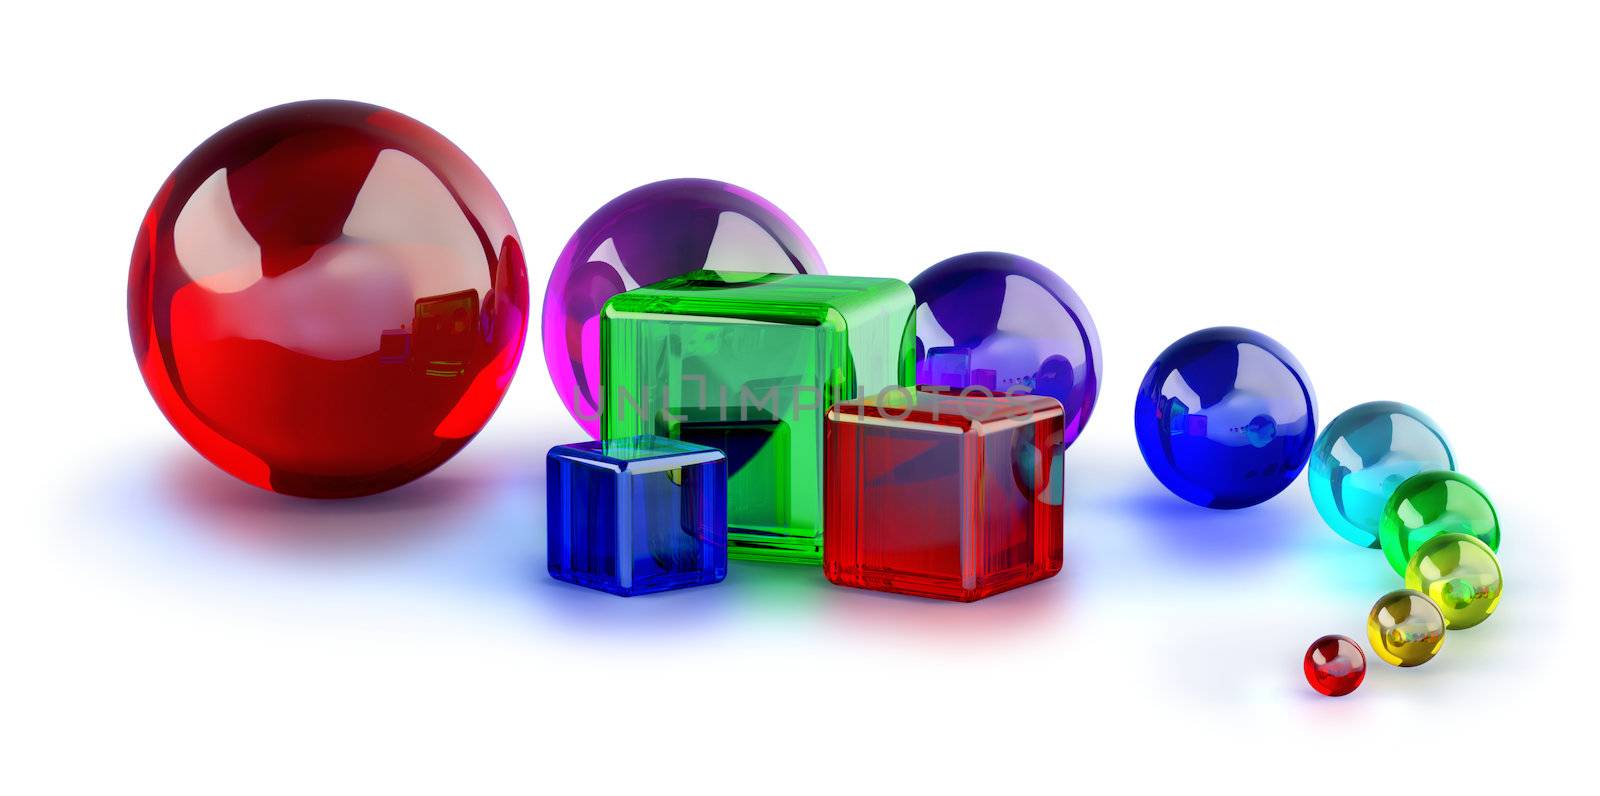 glass cubes and colorful marble balls by merzavka